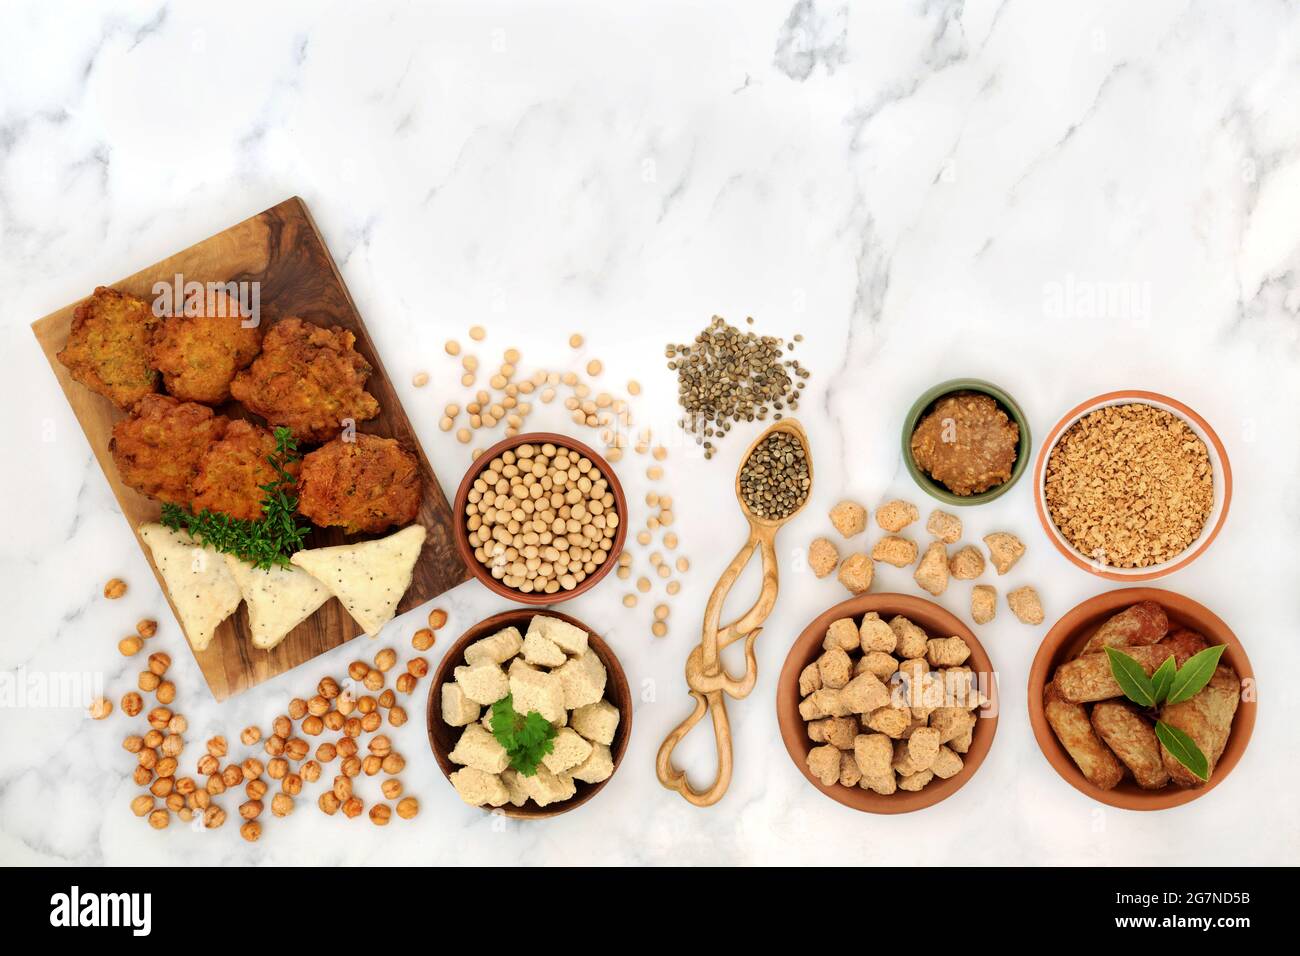 Vegan health food for a healthy diet with tofu bean curd, bhajis,  samosas, tvp, miso, soybeans, chickpeas. Plant based health foods. Stock Photo